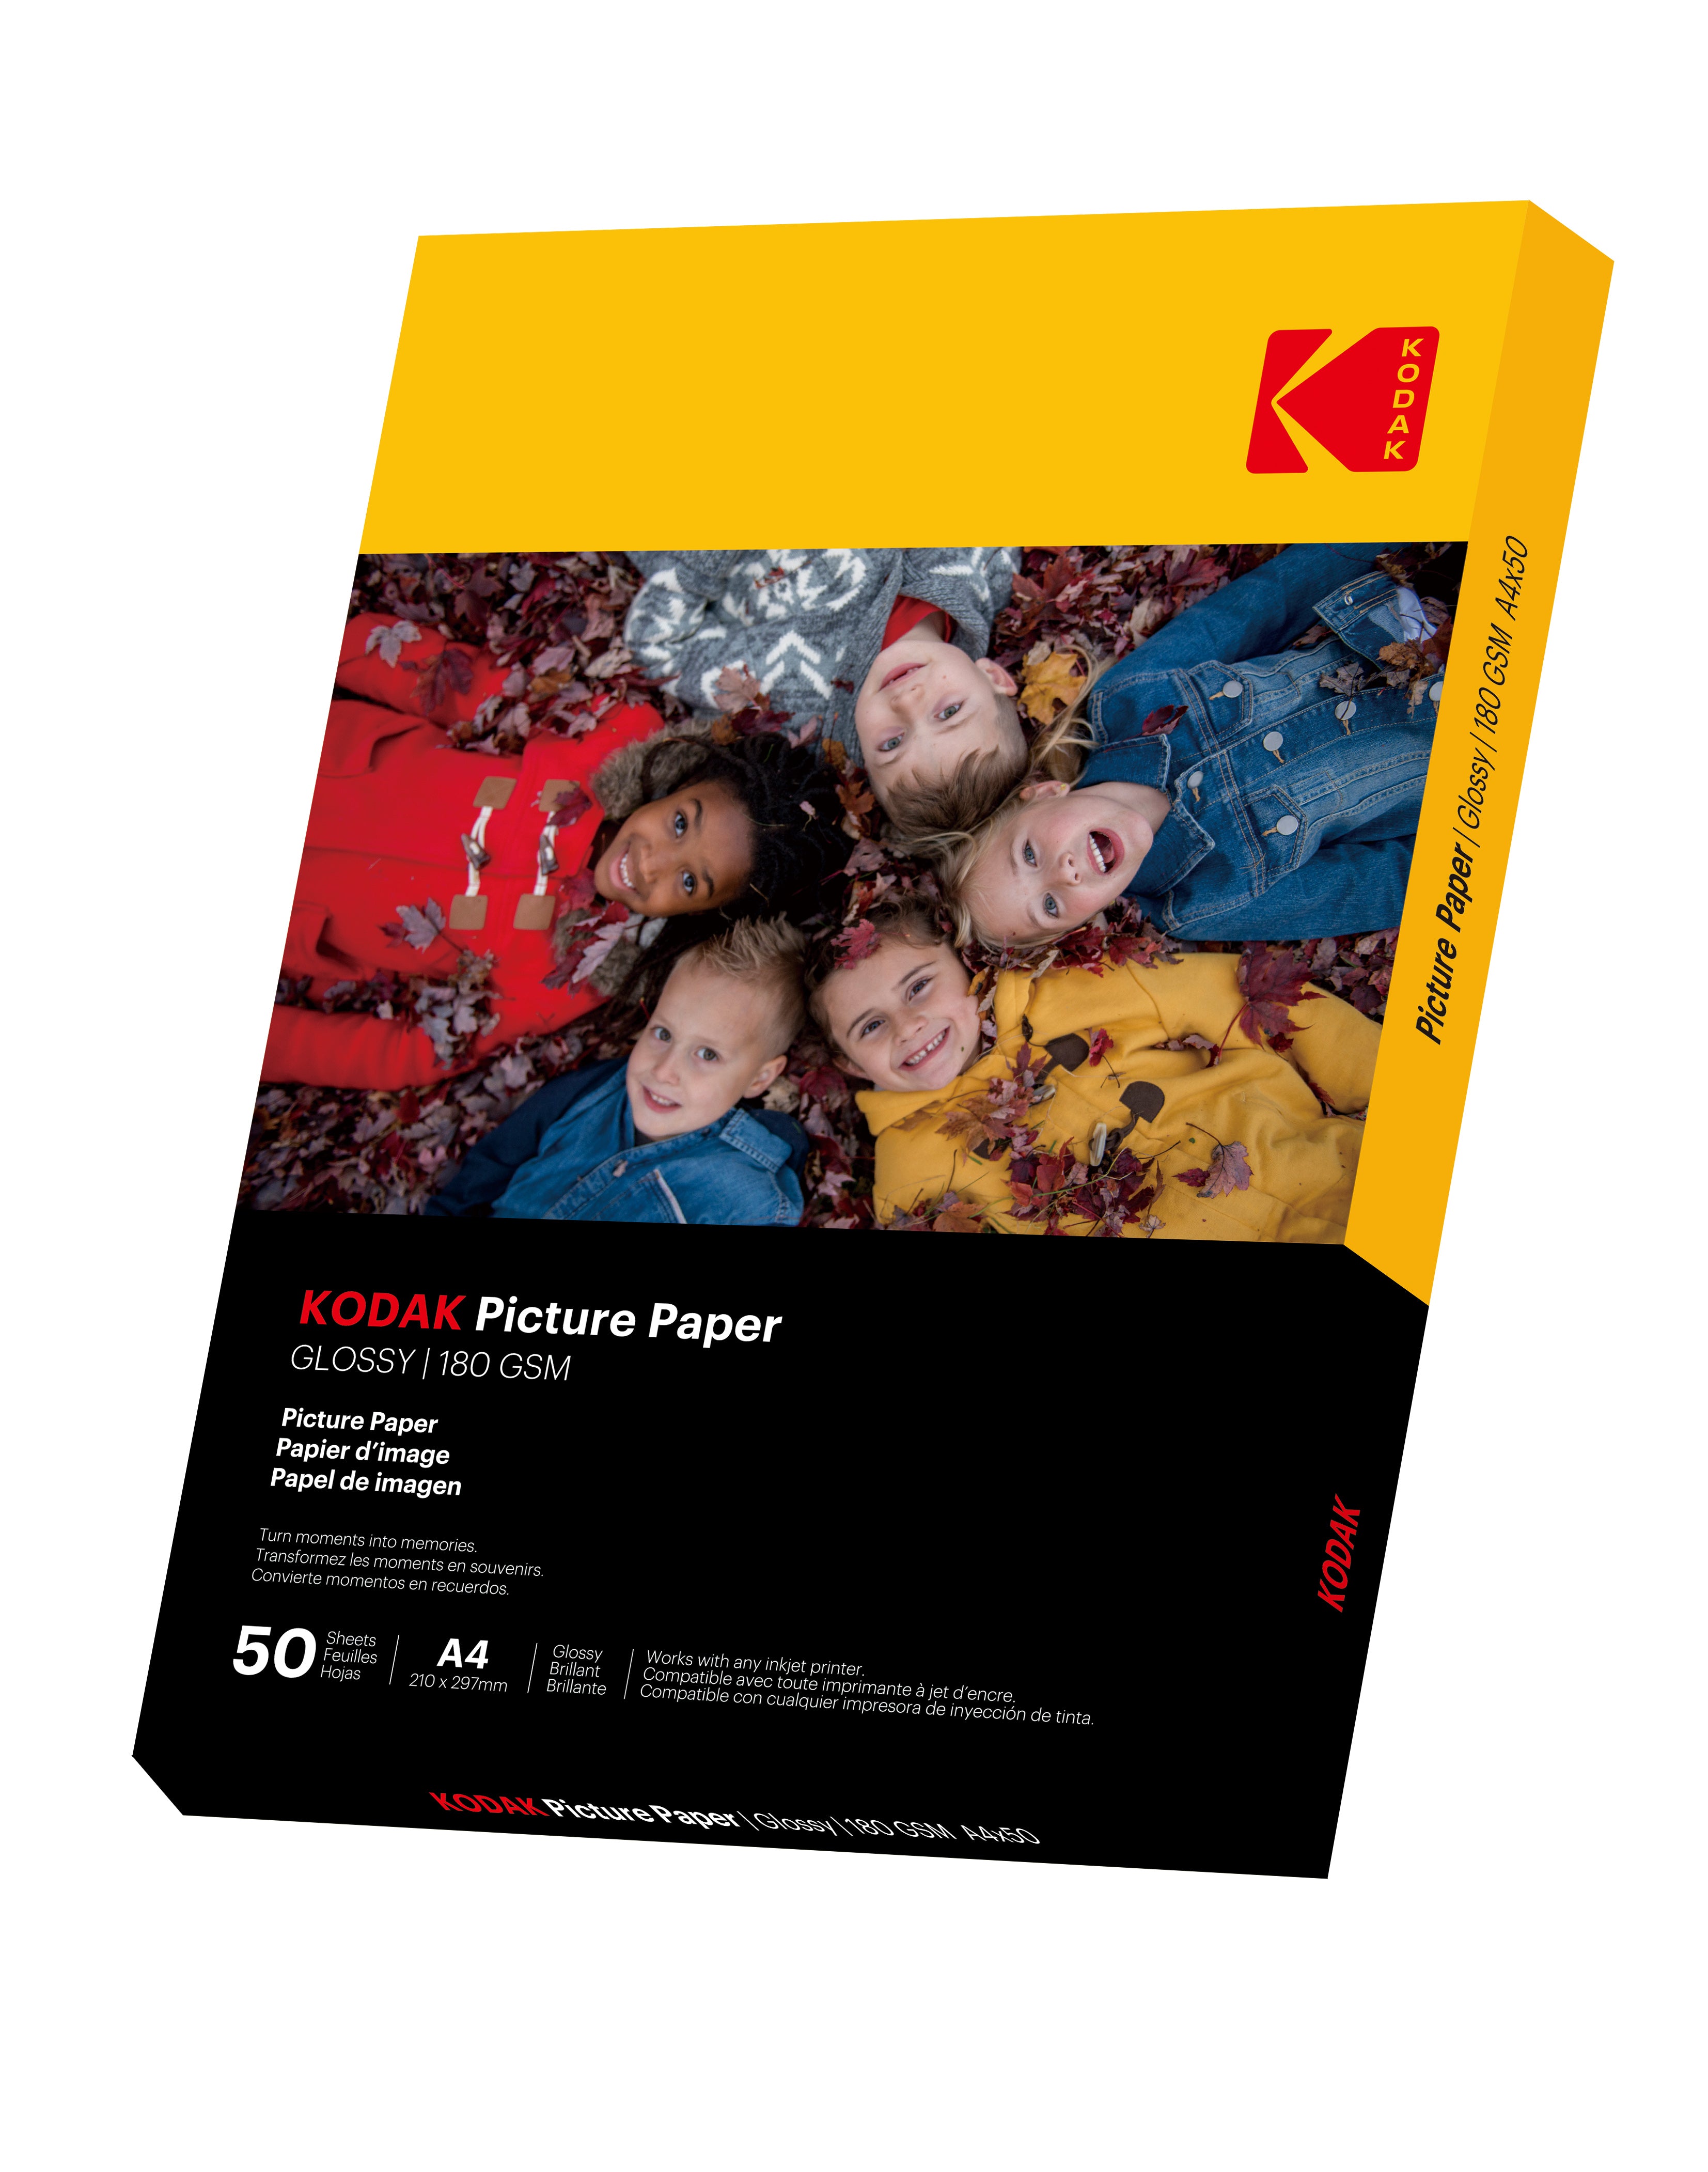 Kodak Picture Paper  Glossy  180 gsm  A4 Size x 50 Sheets